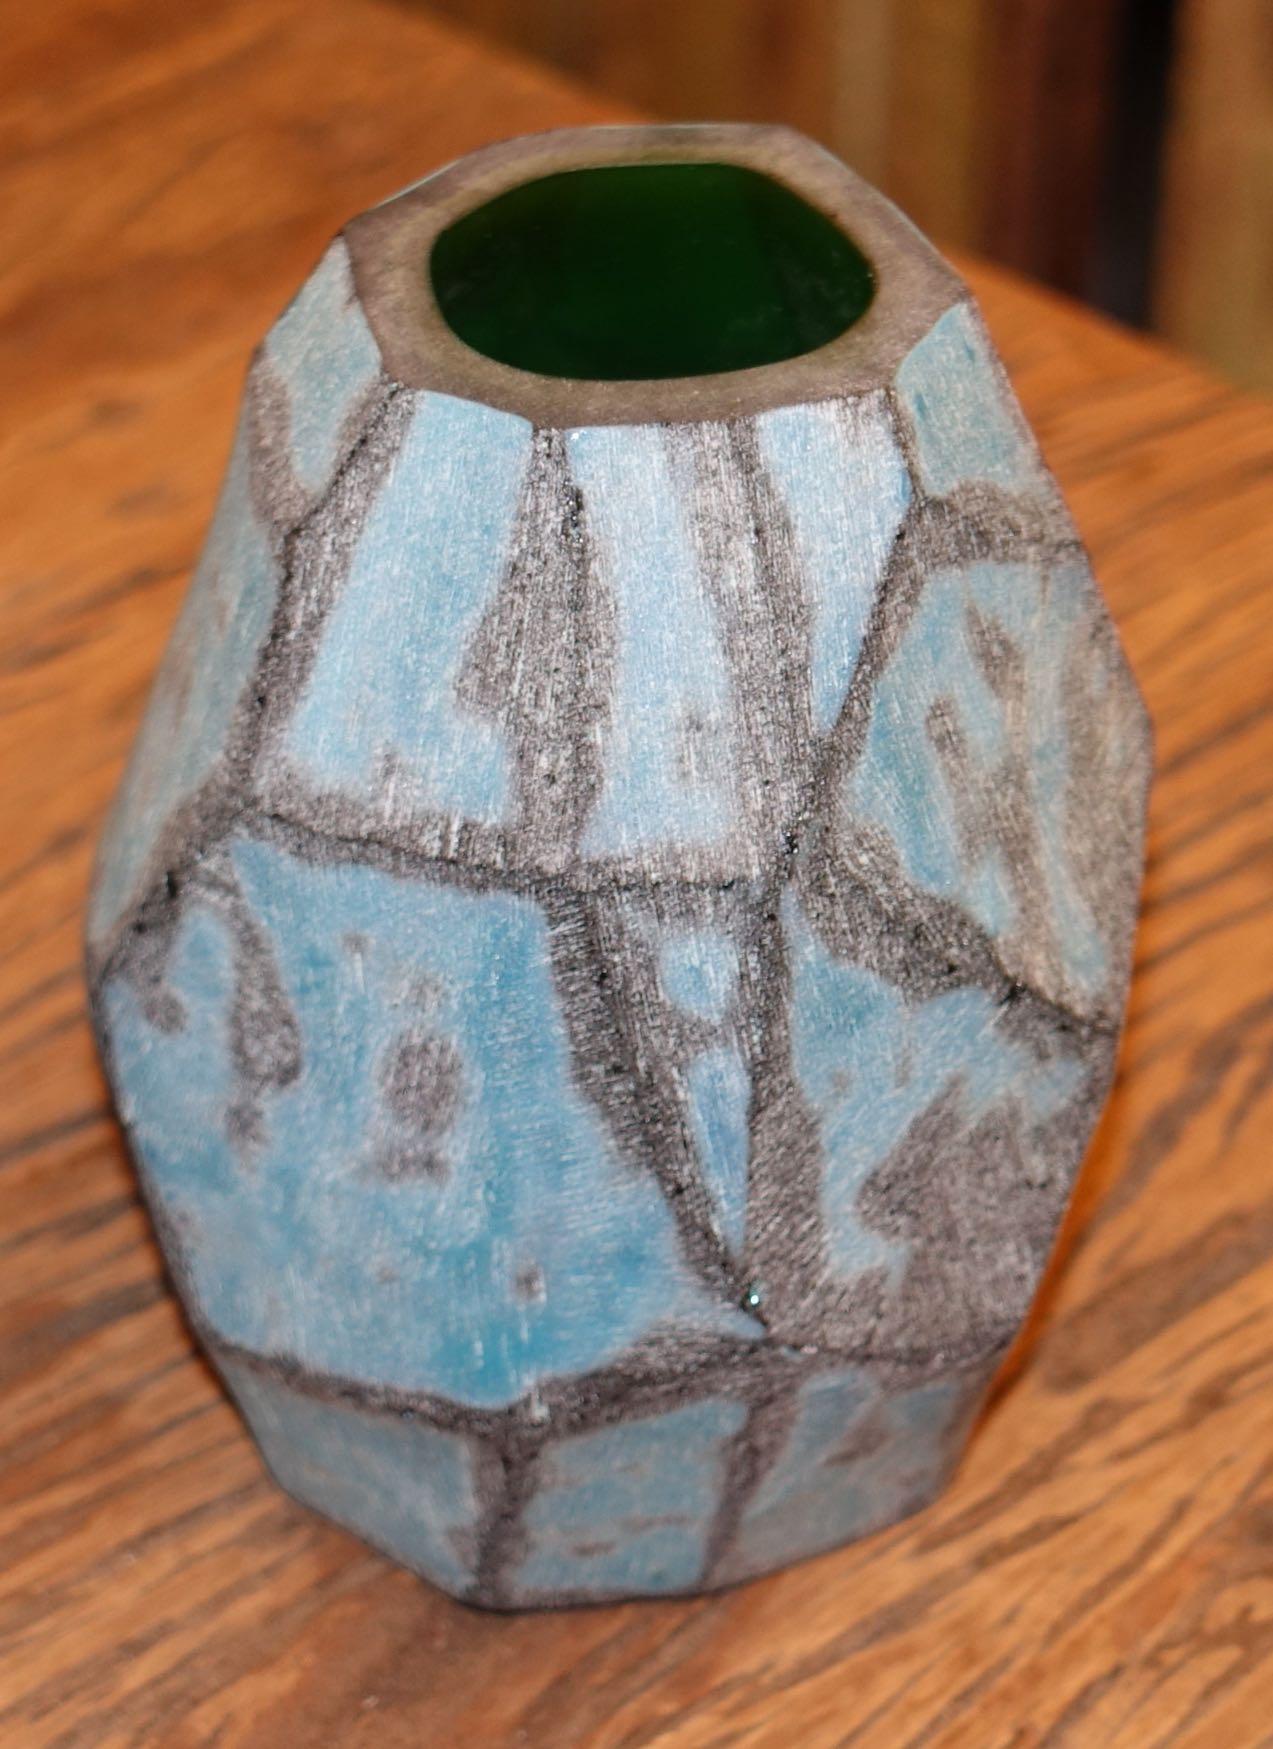 Contemporary Chinese peacock blue glass vase with charcoal grey etched lines.
Frosted finish.
Overall geometric pattern design.
Larger accompanying style S5214.